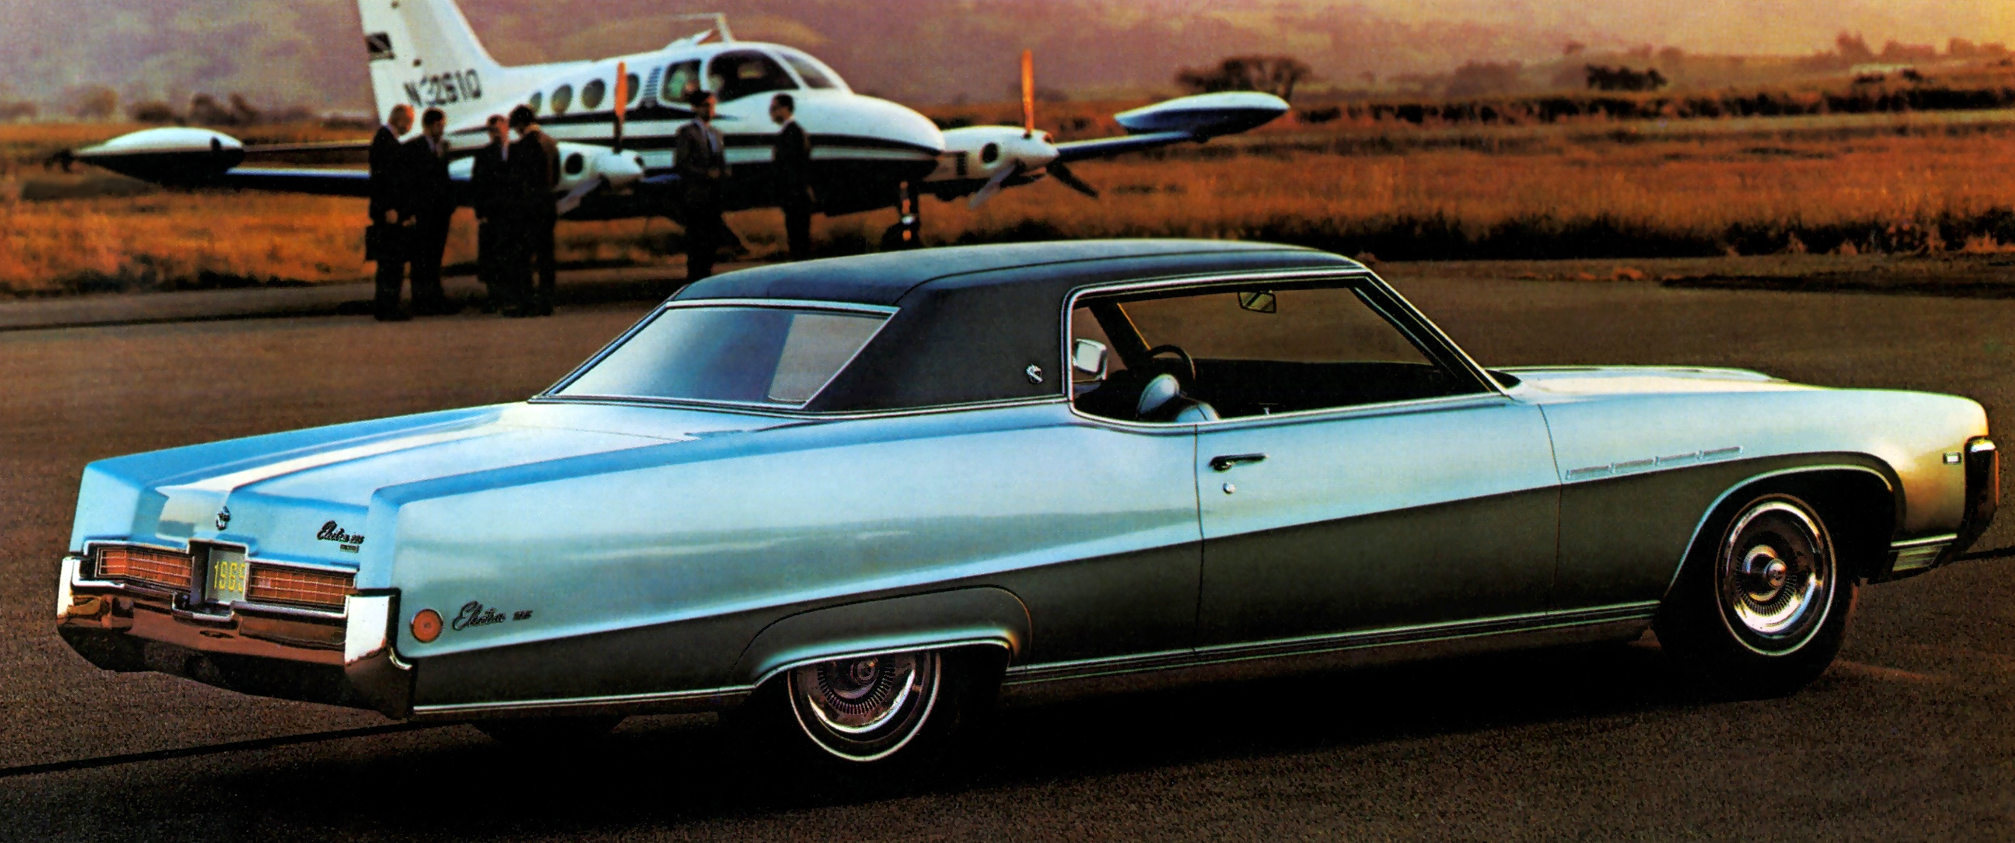 1969 Buick Electra 